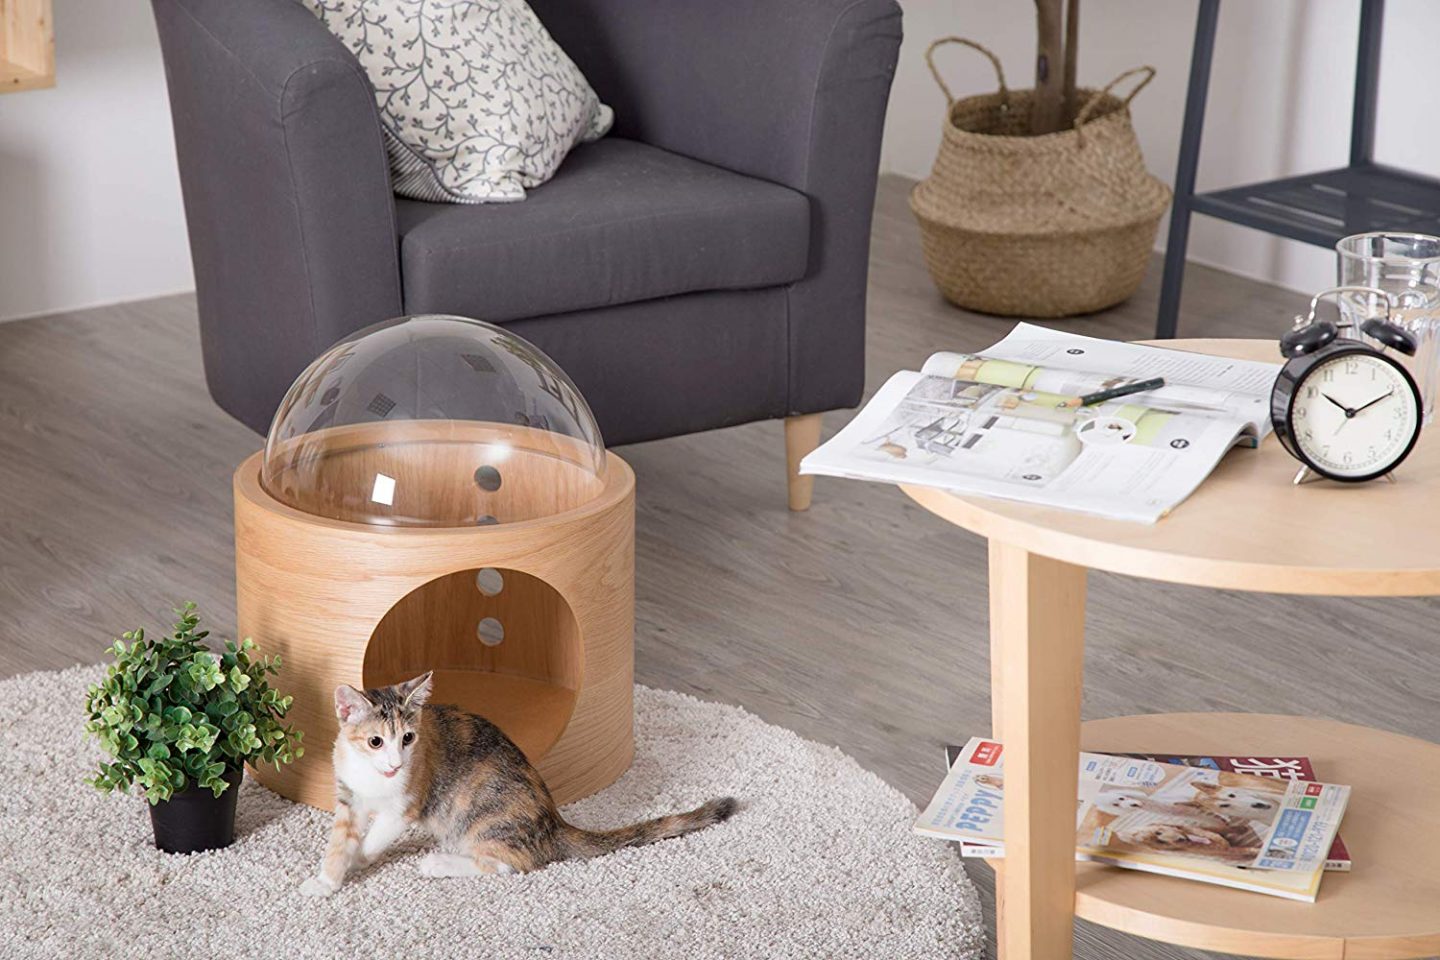 This cat shelf can also be used as a modern bubble cat bed, it's still got that really cool space theme going on too.